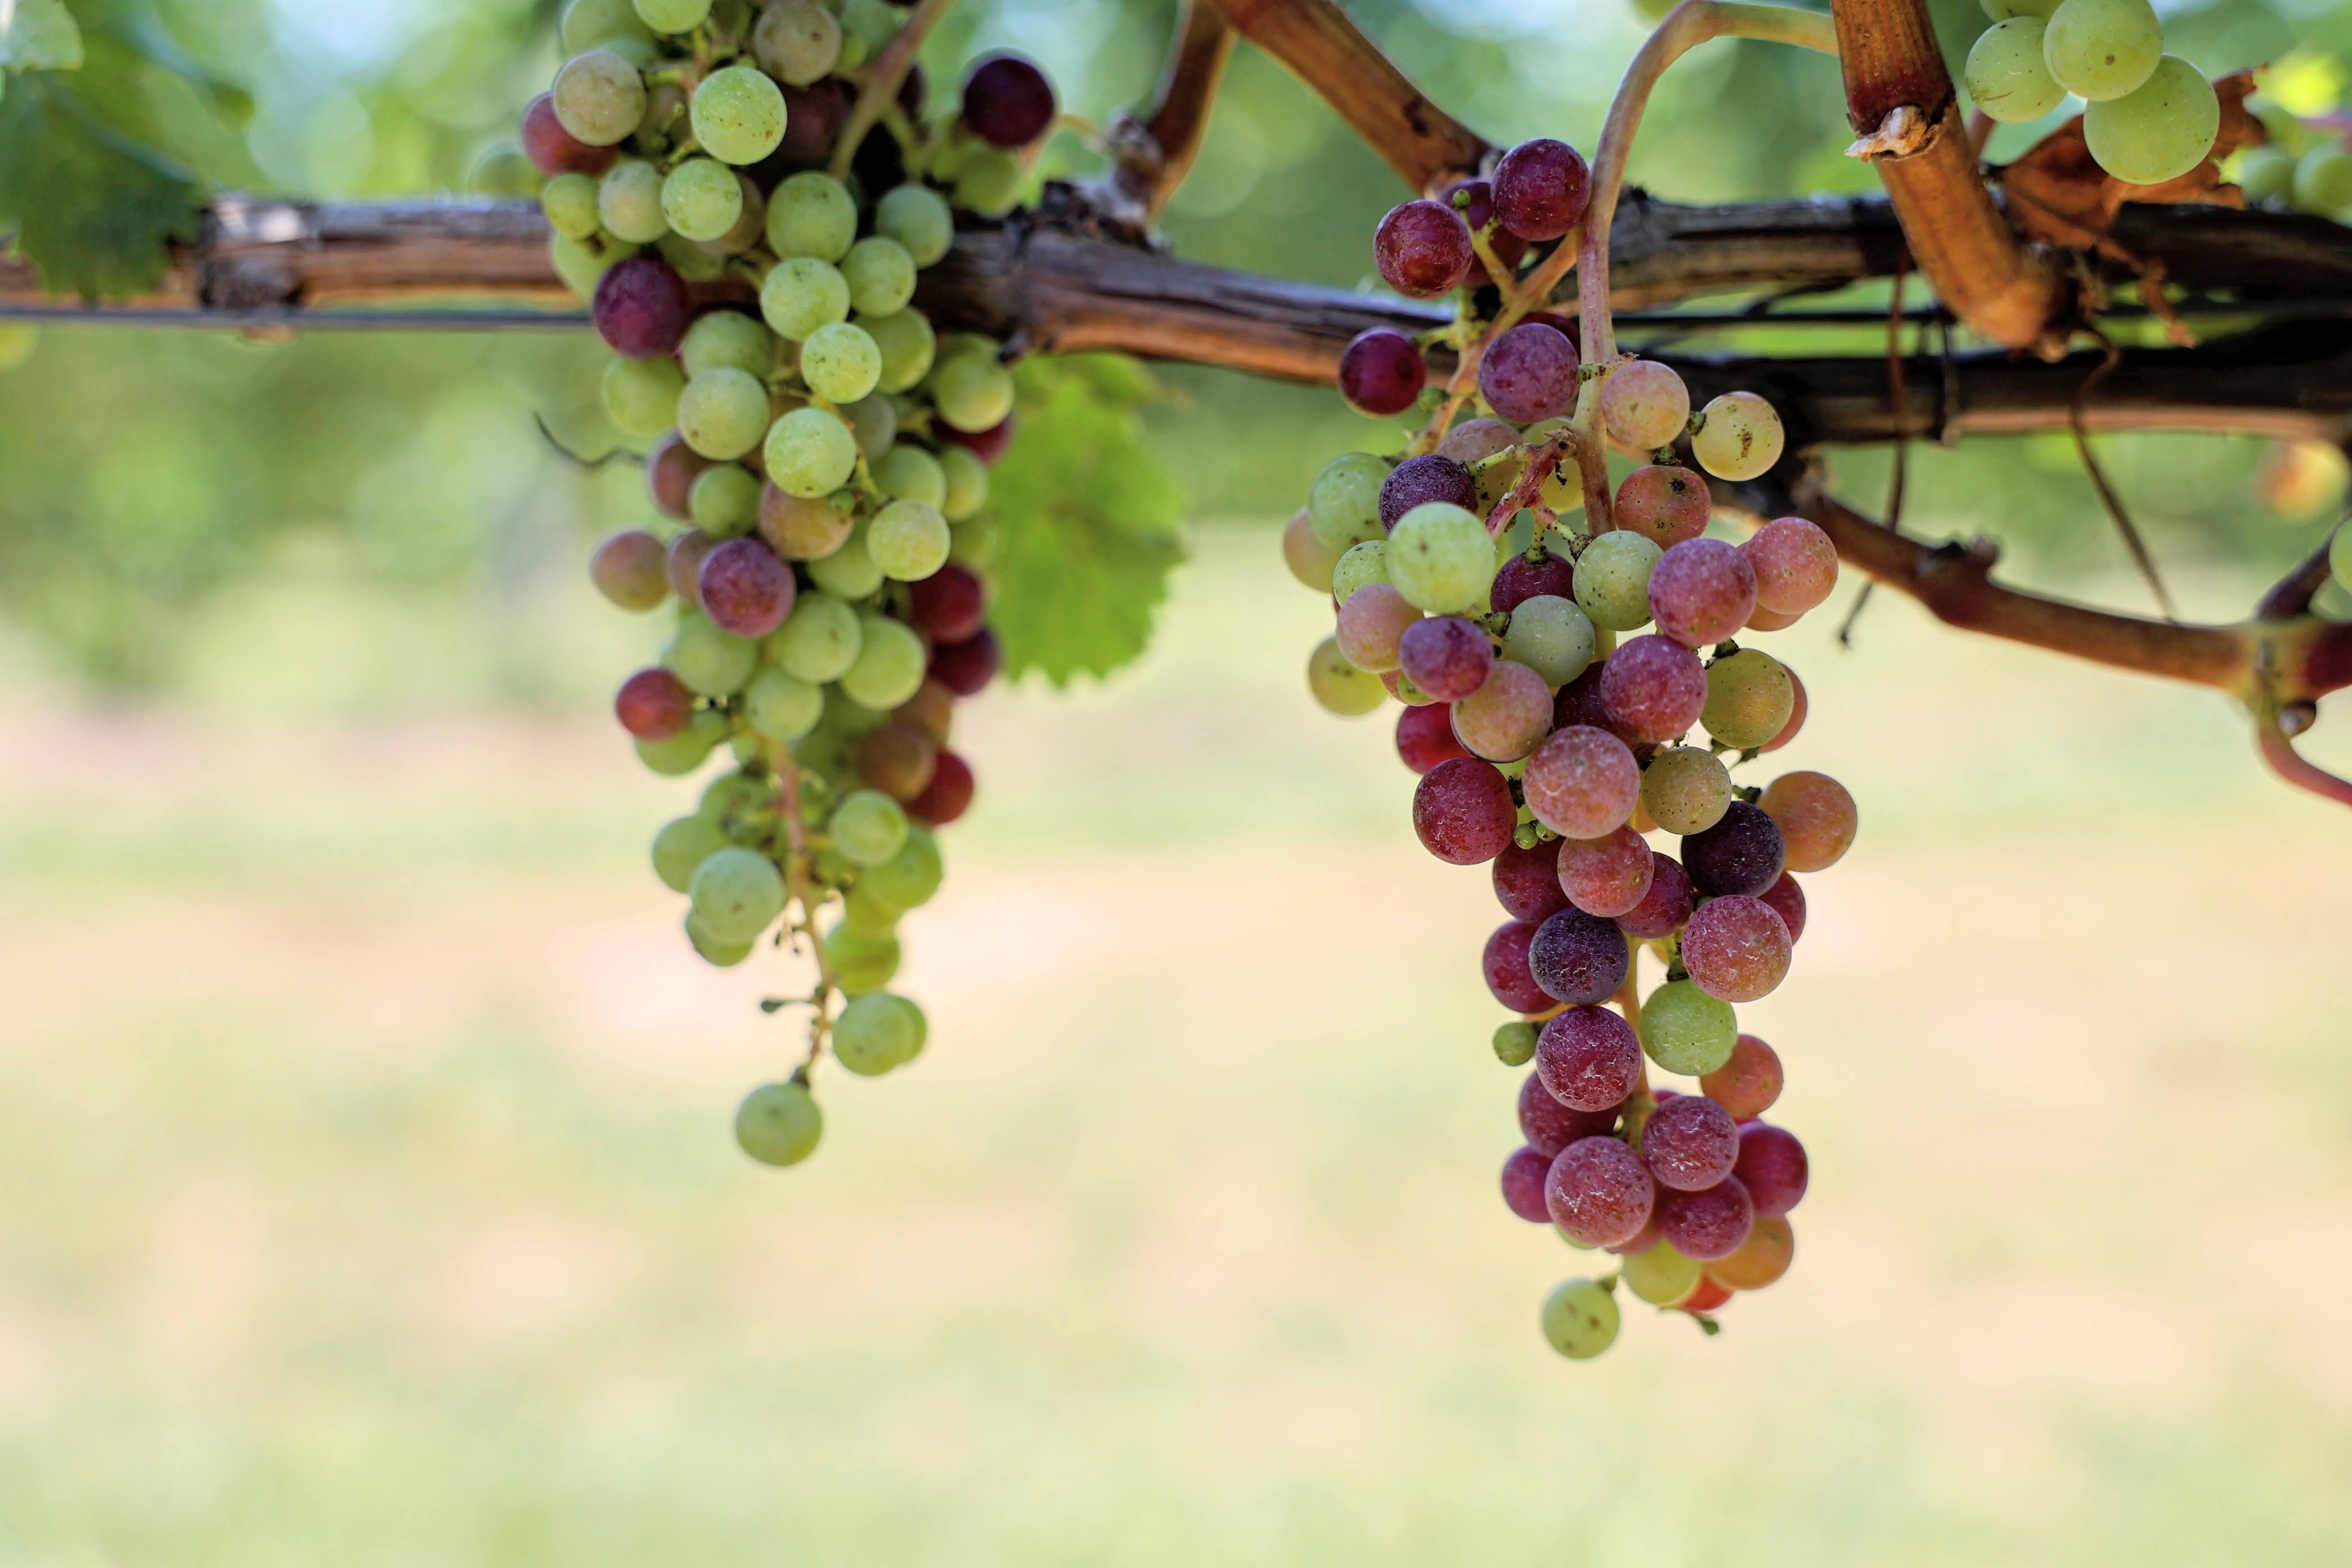 A cluster of grapes hanging from a branch.